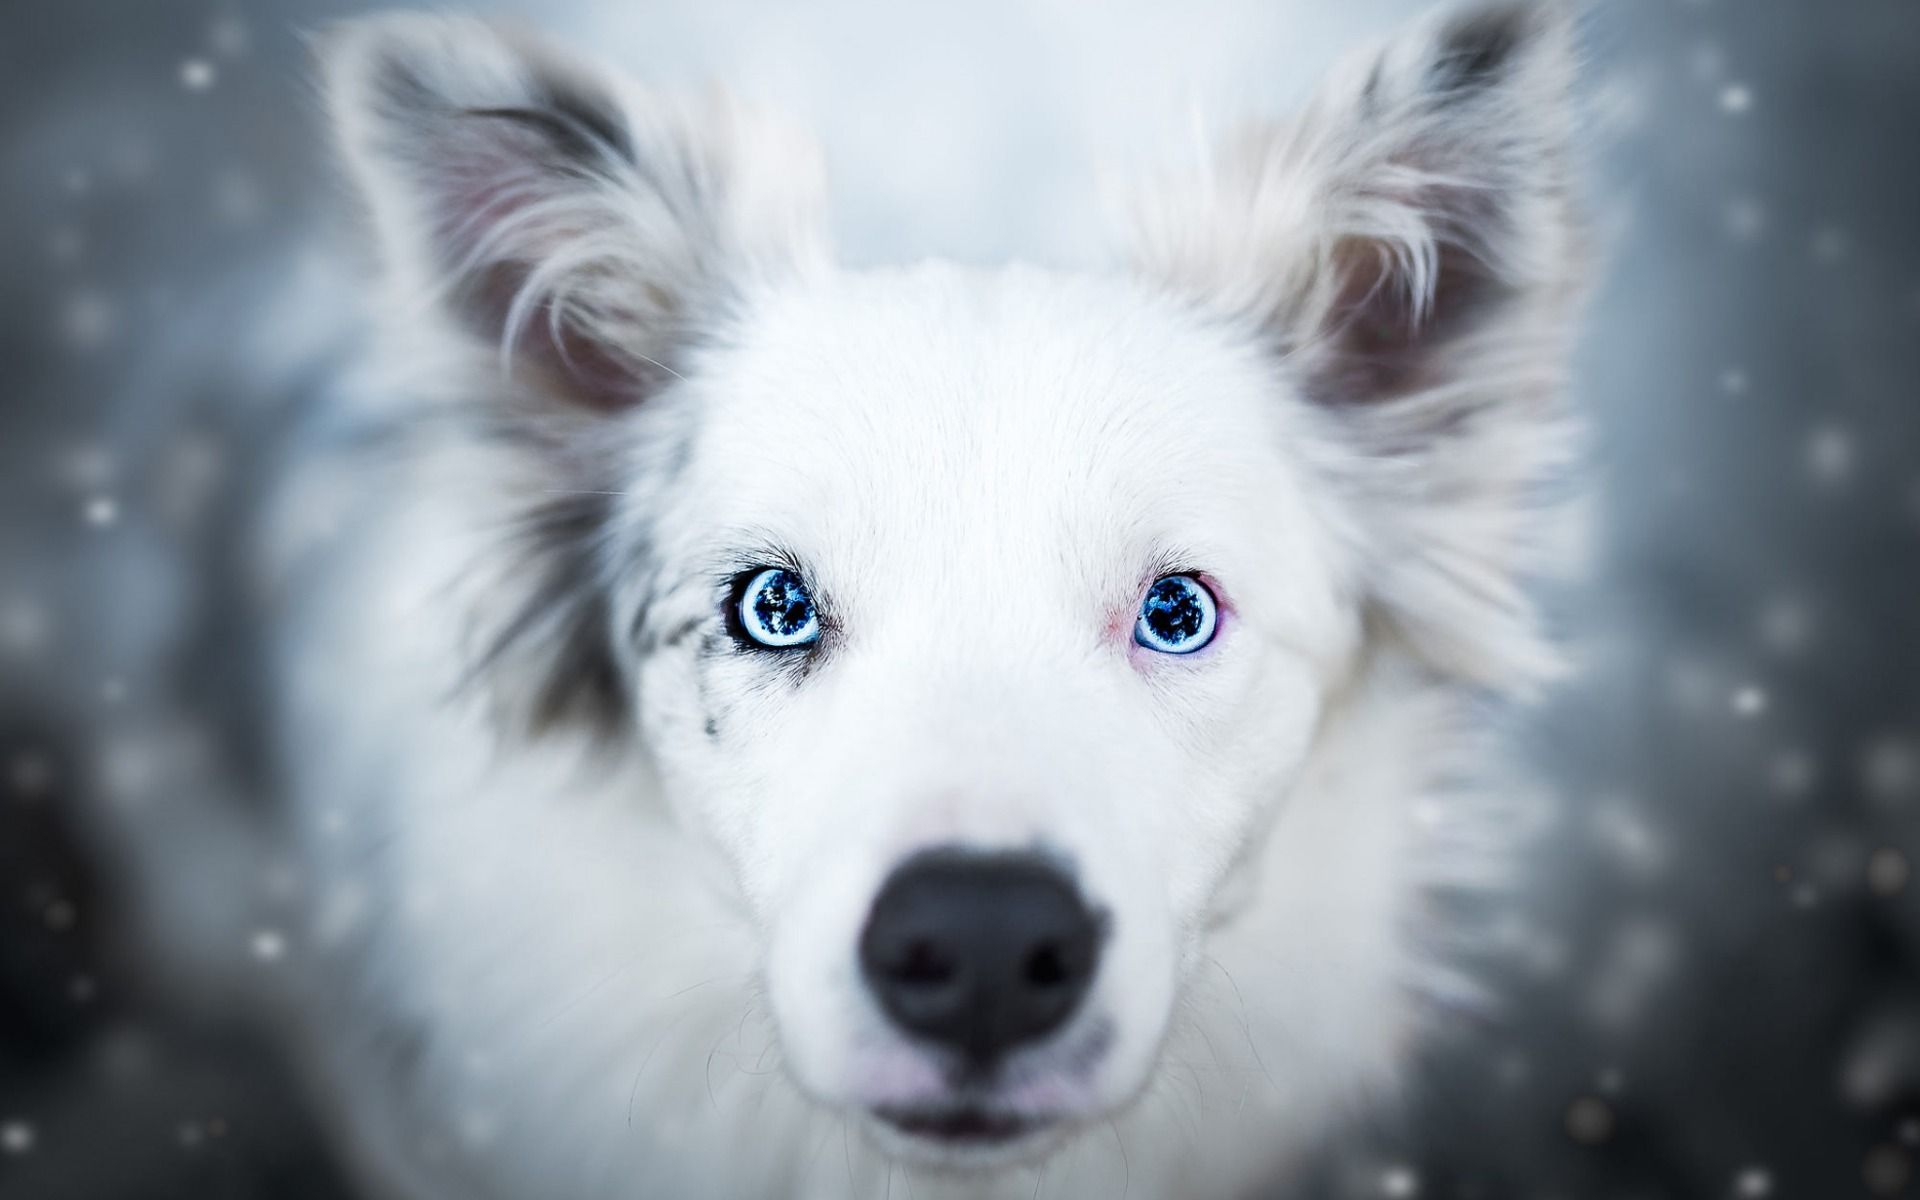 Download wallpaper Australian Shepherd Dog, large blue eyes, white fluffy dog, Aussie, blur, cute animals, dogs for desktop with resolution 1920x1200. High Quality HD picture wallpaper